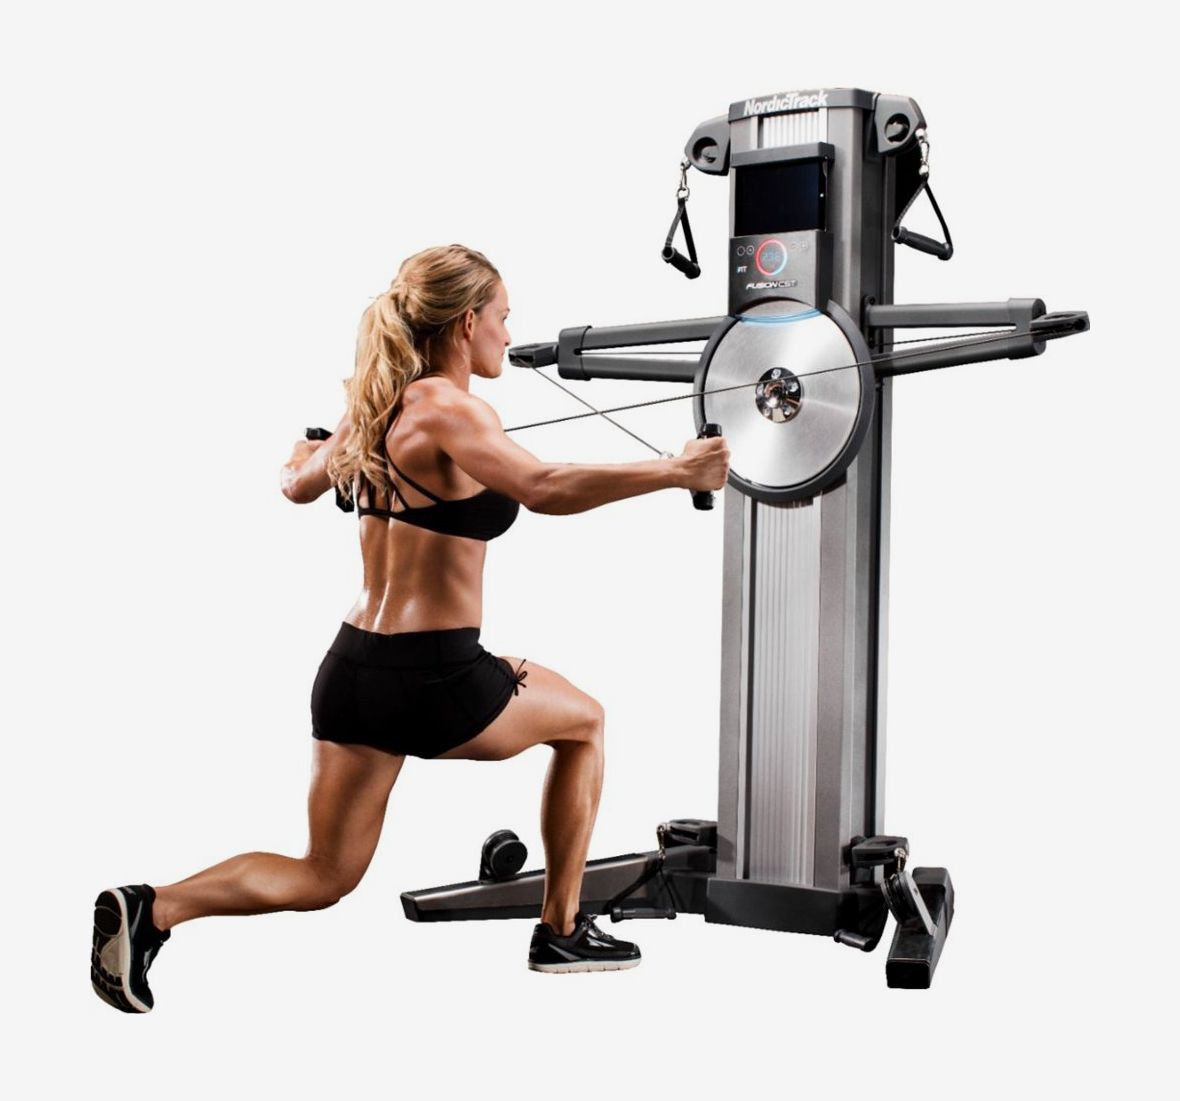 Best Home-Gym Equipment and Reviews